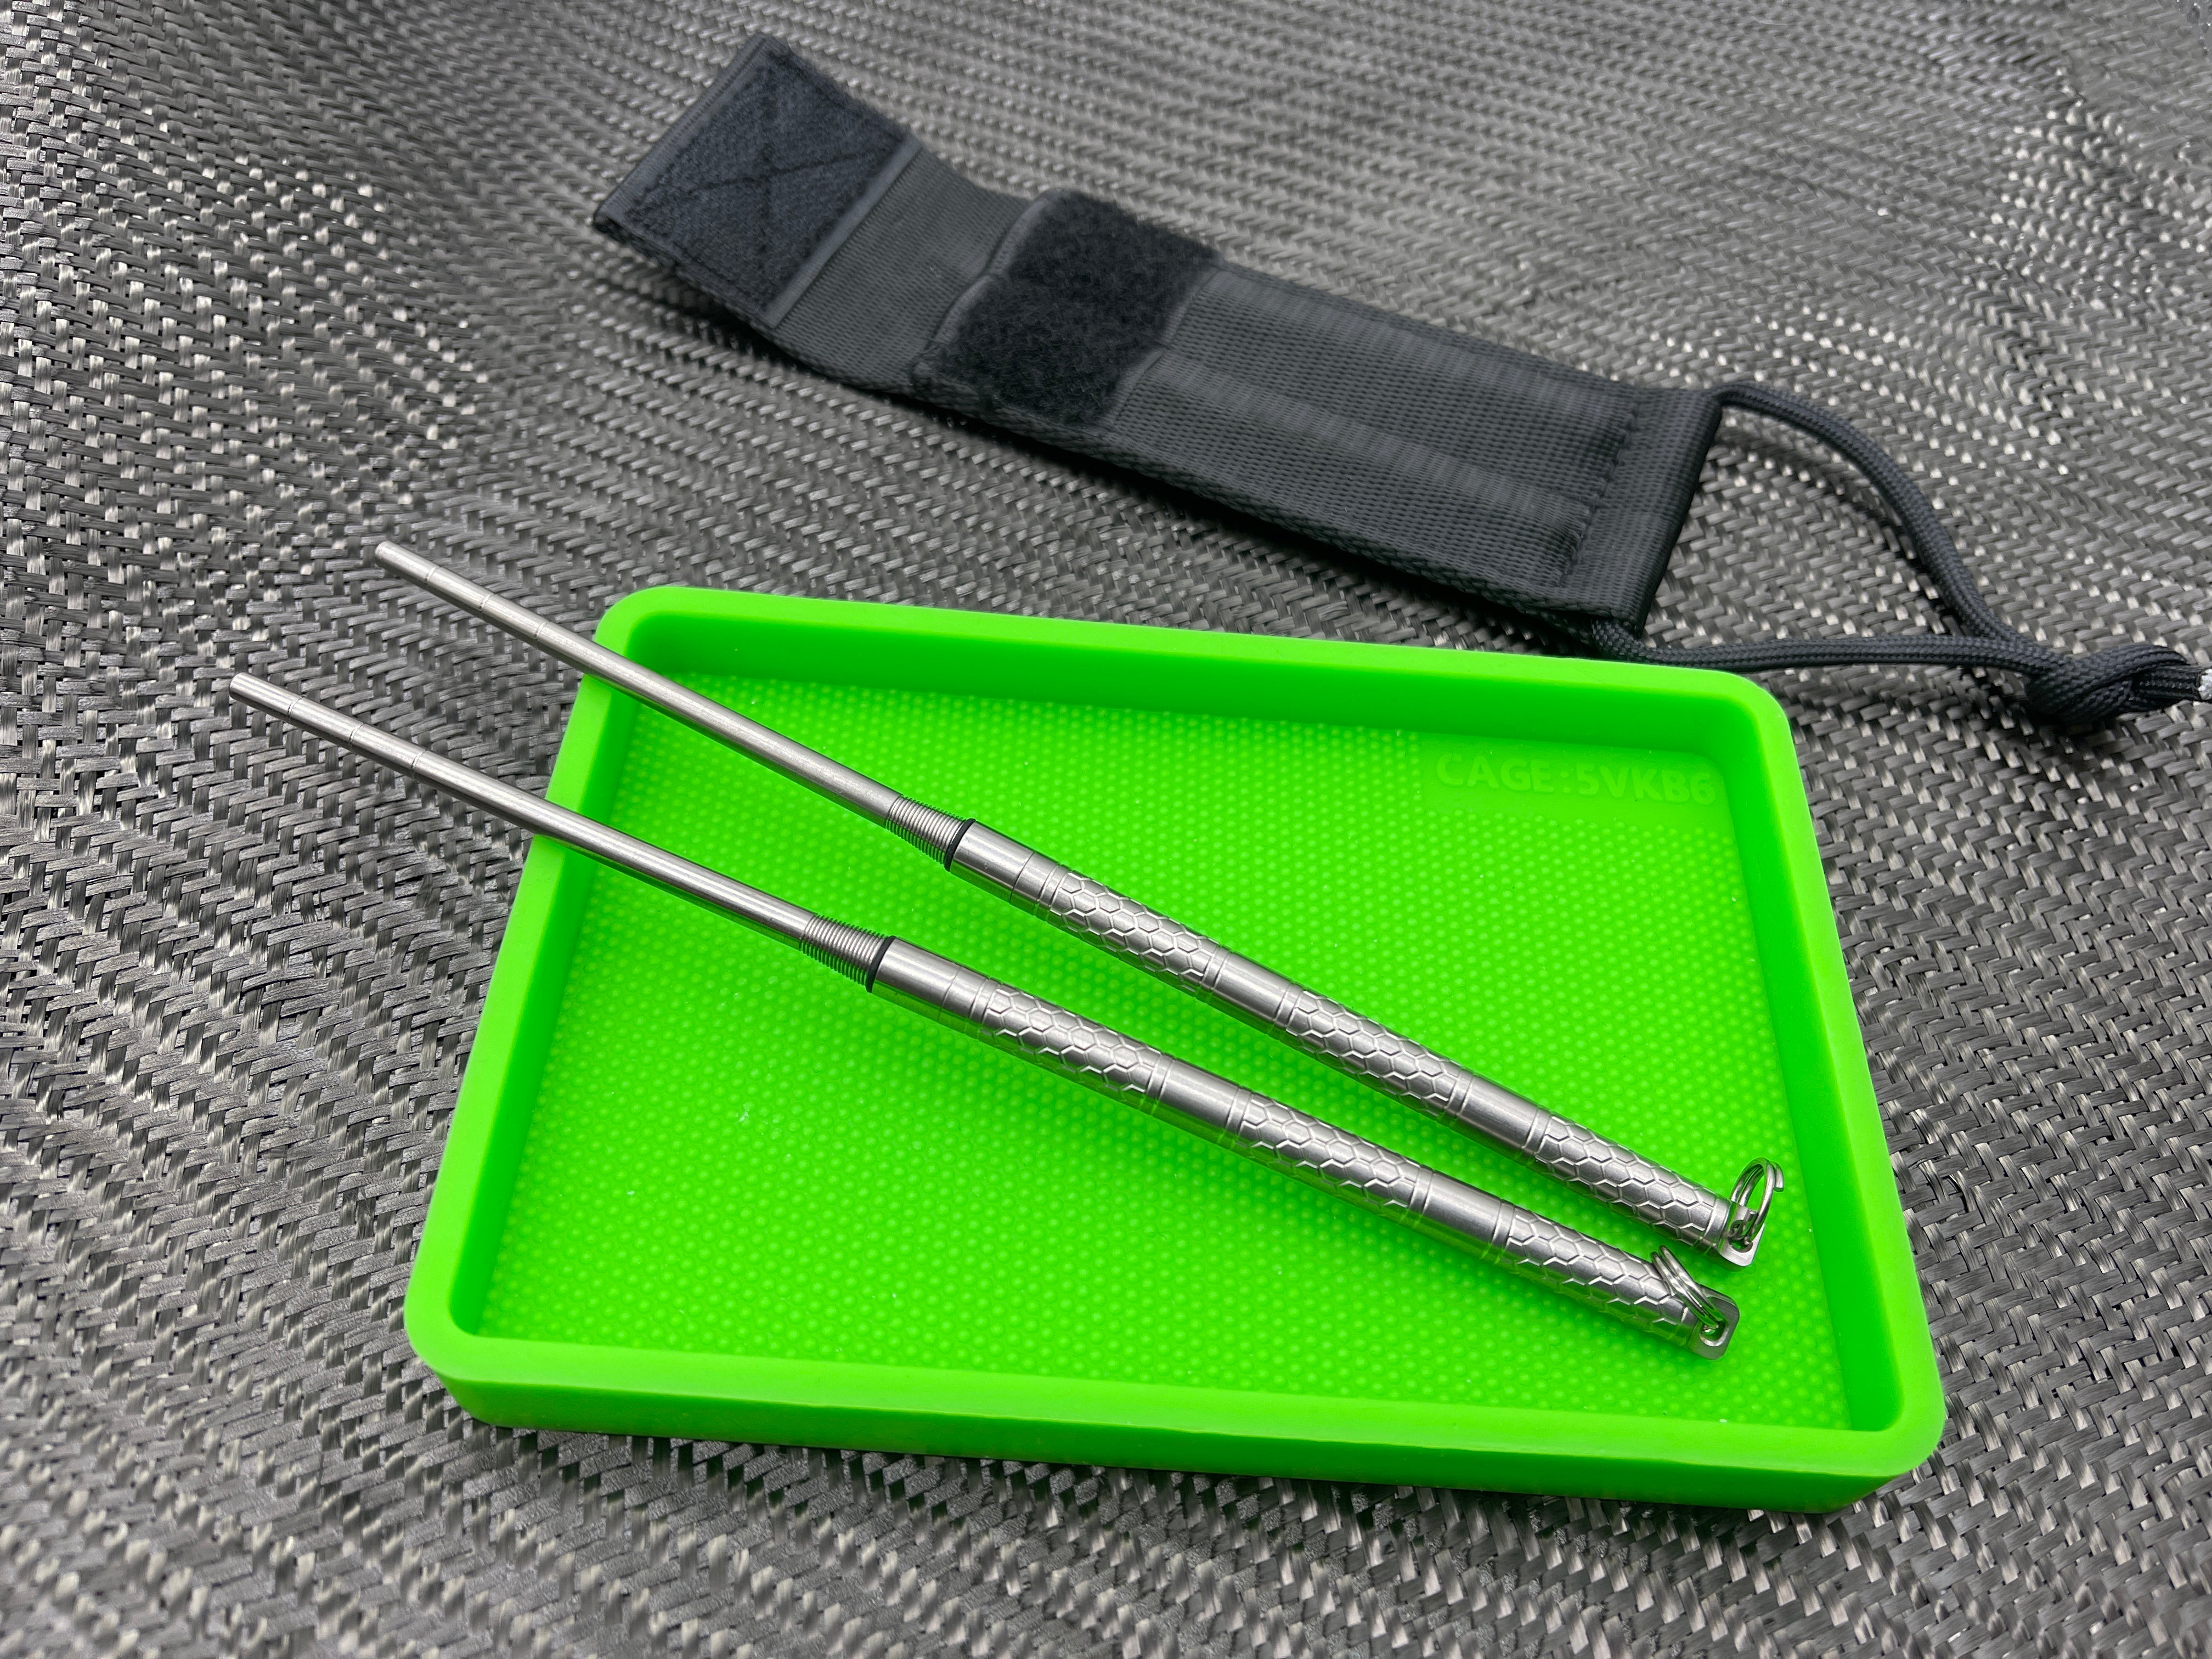 2-in-1 Titanium Folding Chopsticks with Hidden Toothpick by Jing